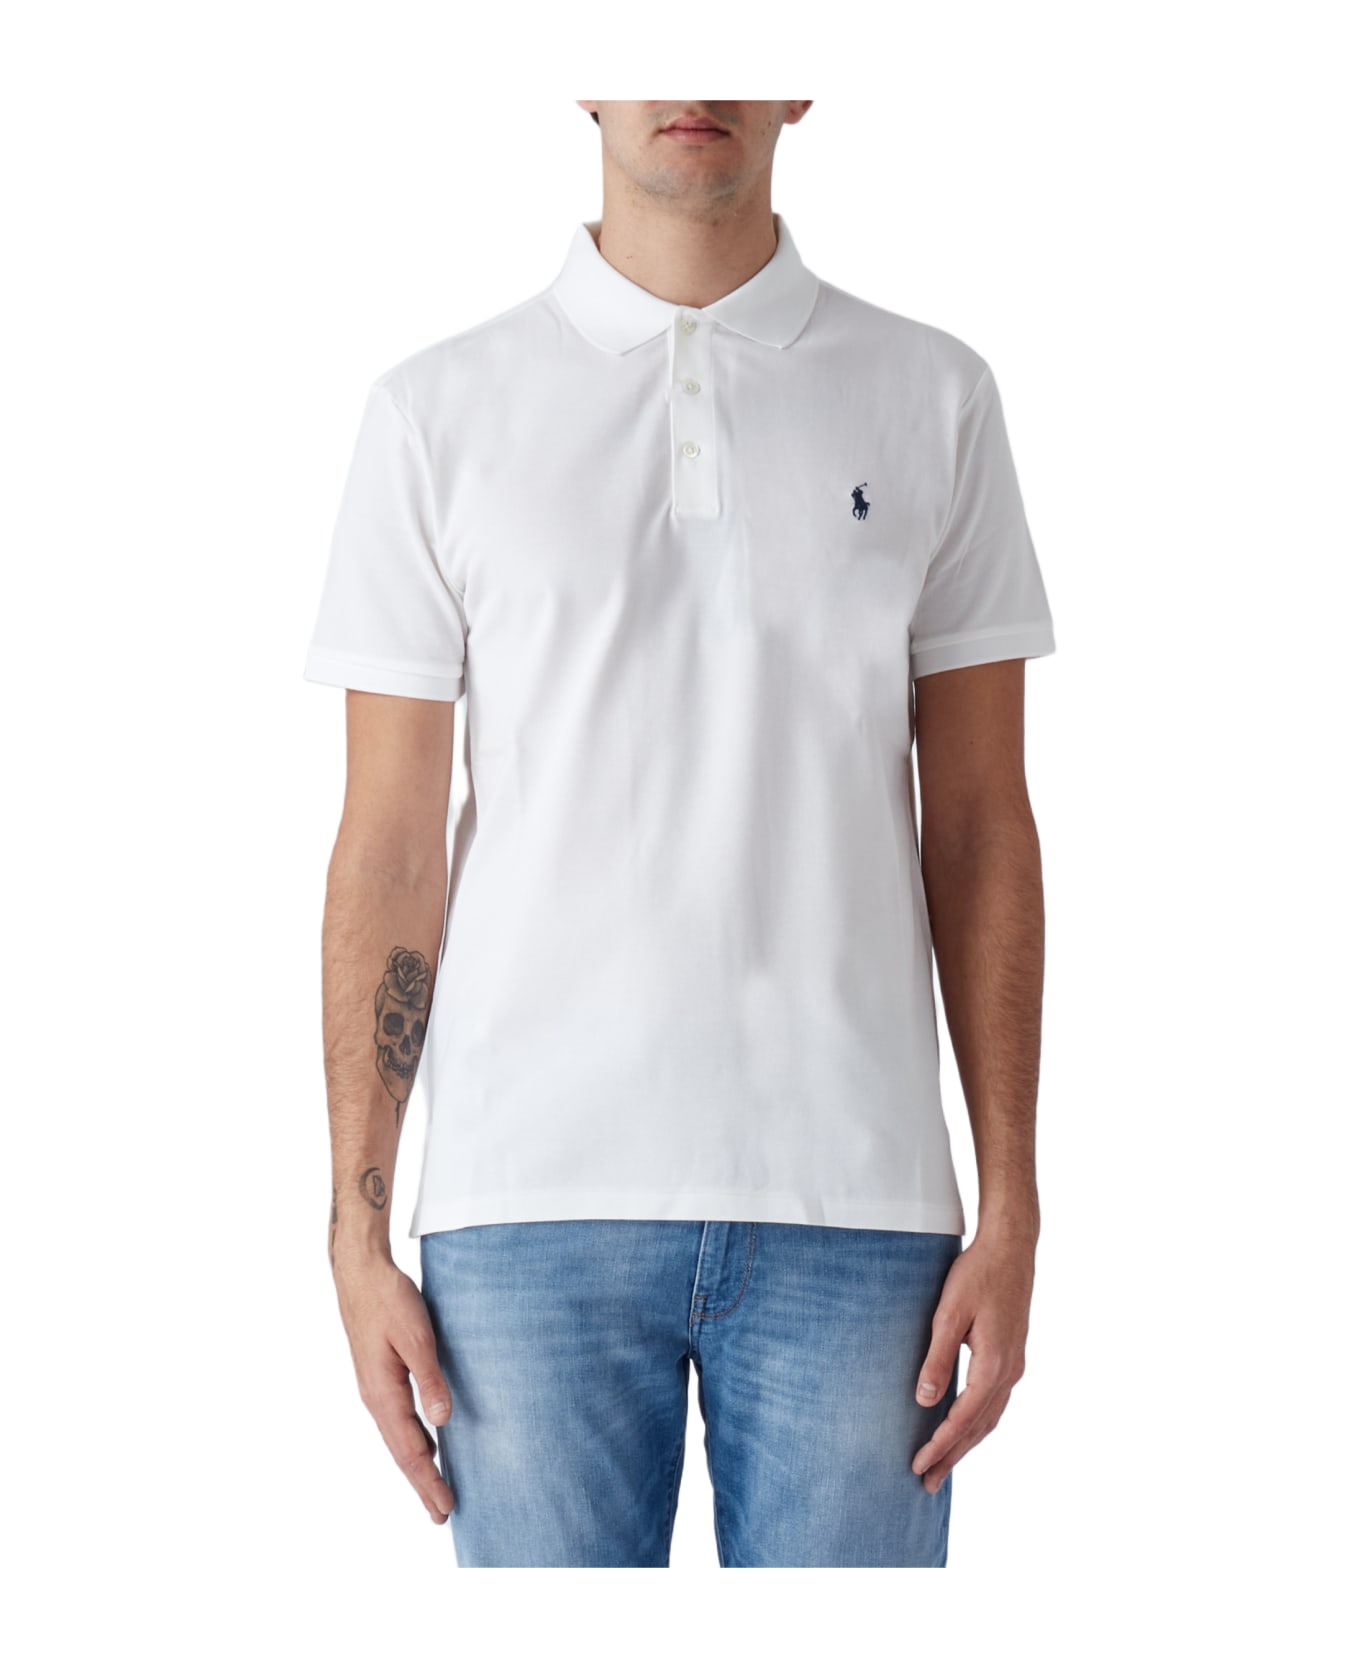 Polo Ralph Lauren White Slim Fit Polo Shirt With Contrasting Pony - 008